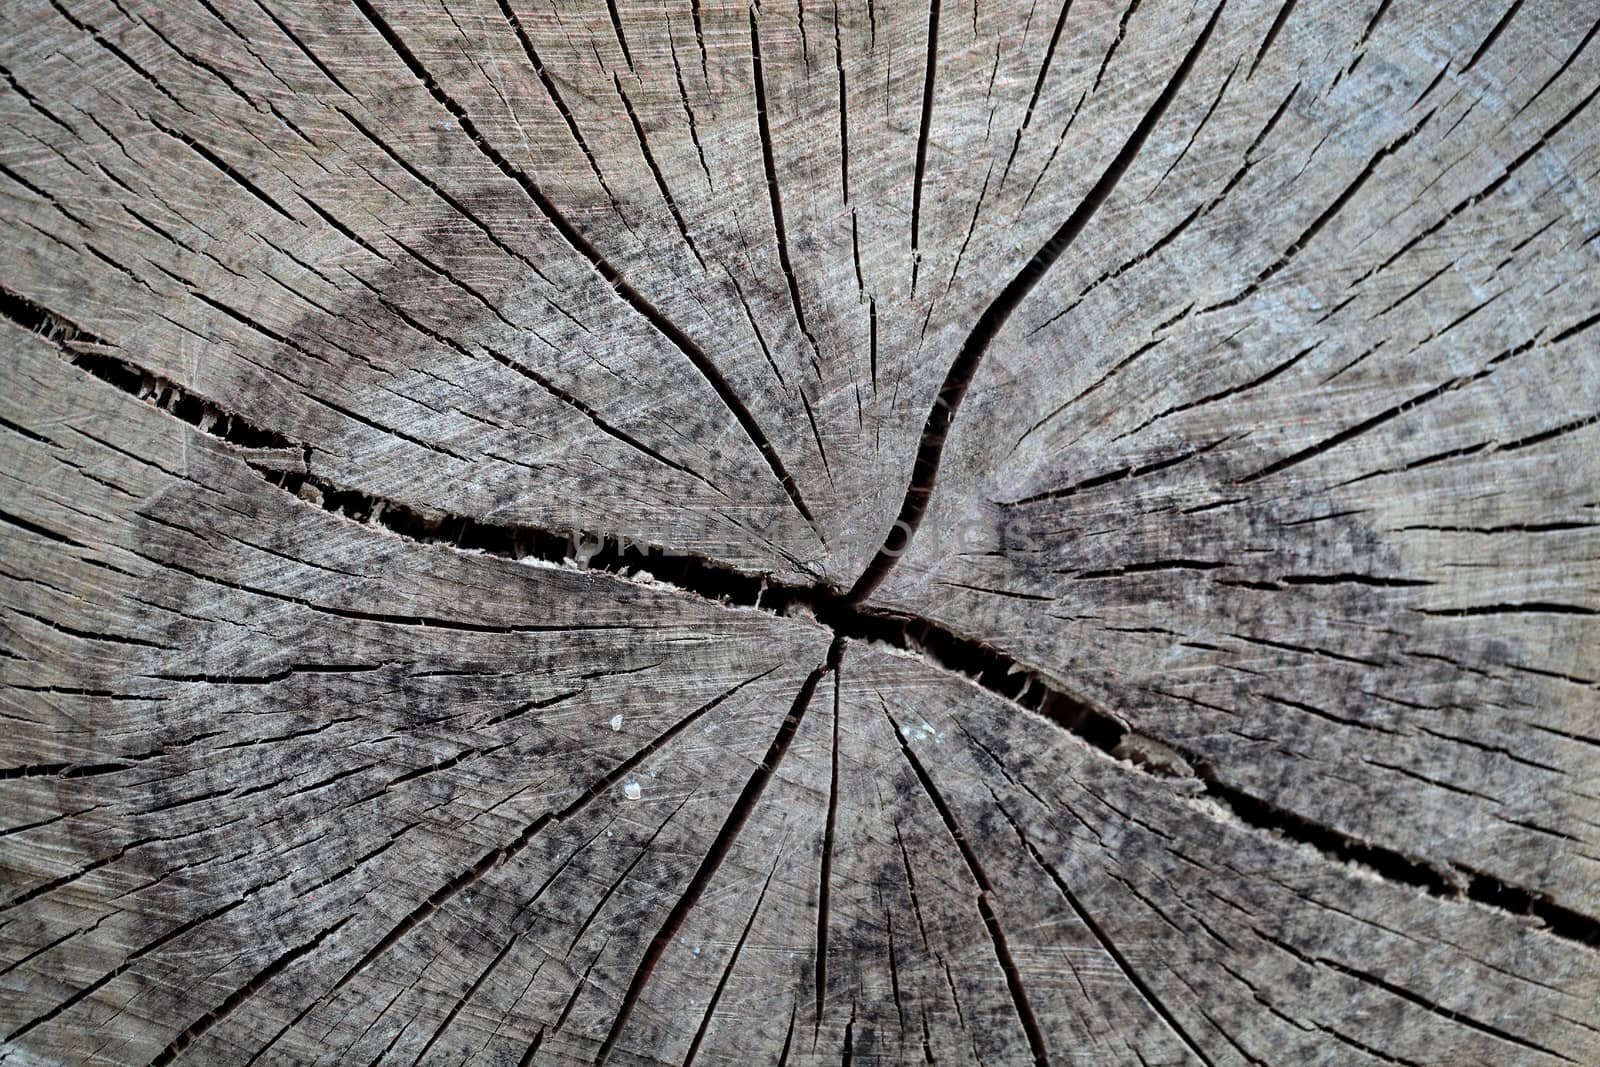 A macro photo of sawn wood as background.